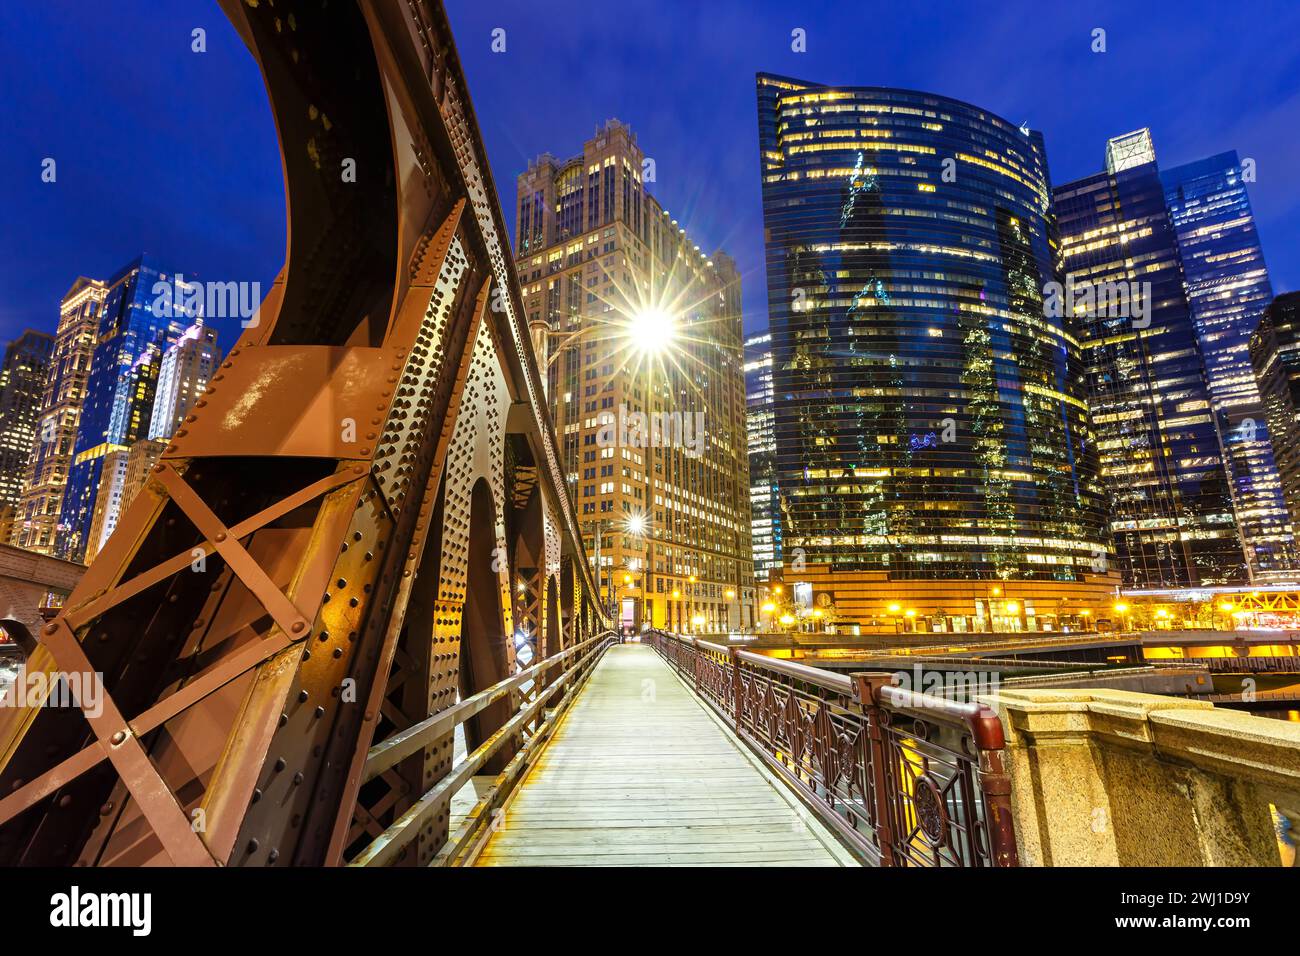 Chicago skyline skyscrapers skyscrapers with Franklin-Orleans Street Bridge bridge at night in the USA Stock Photo